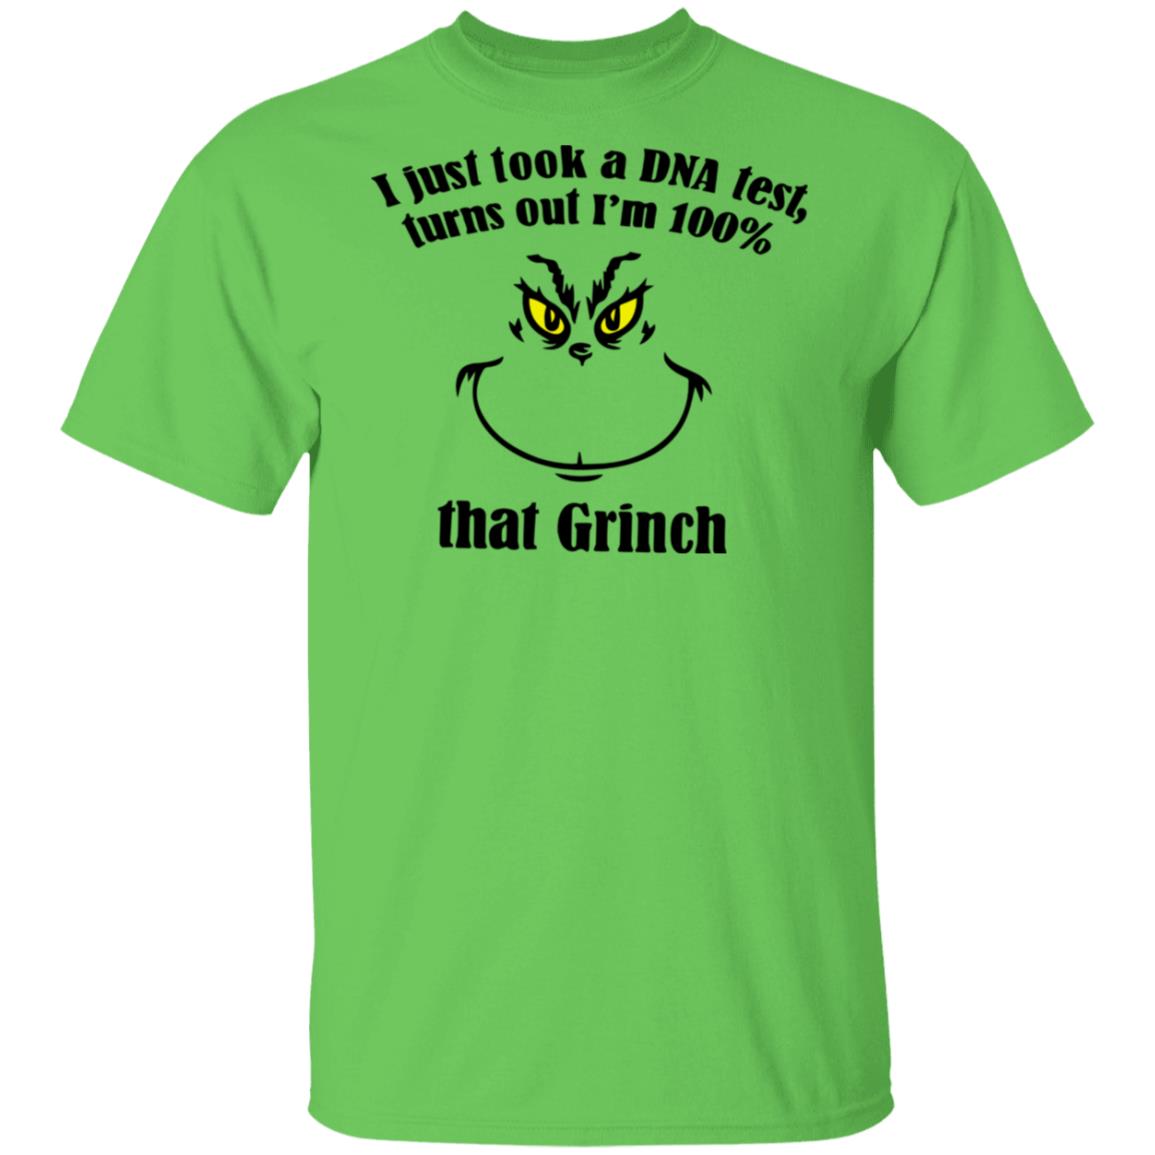 I Just Took A DNA Test Turns Out I’m 100% That Grinch Face T-Shirt